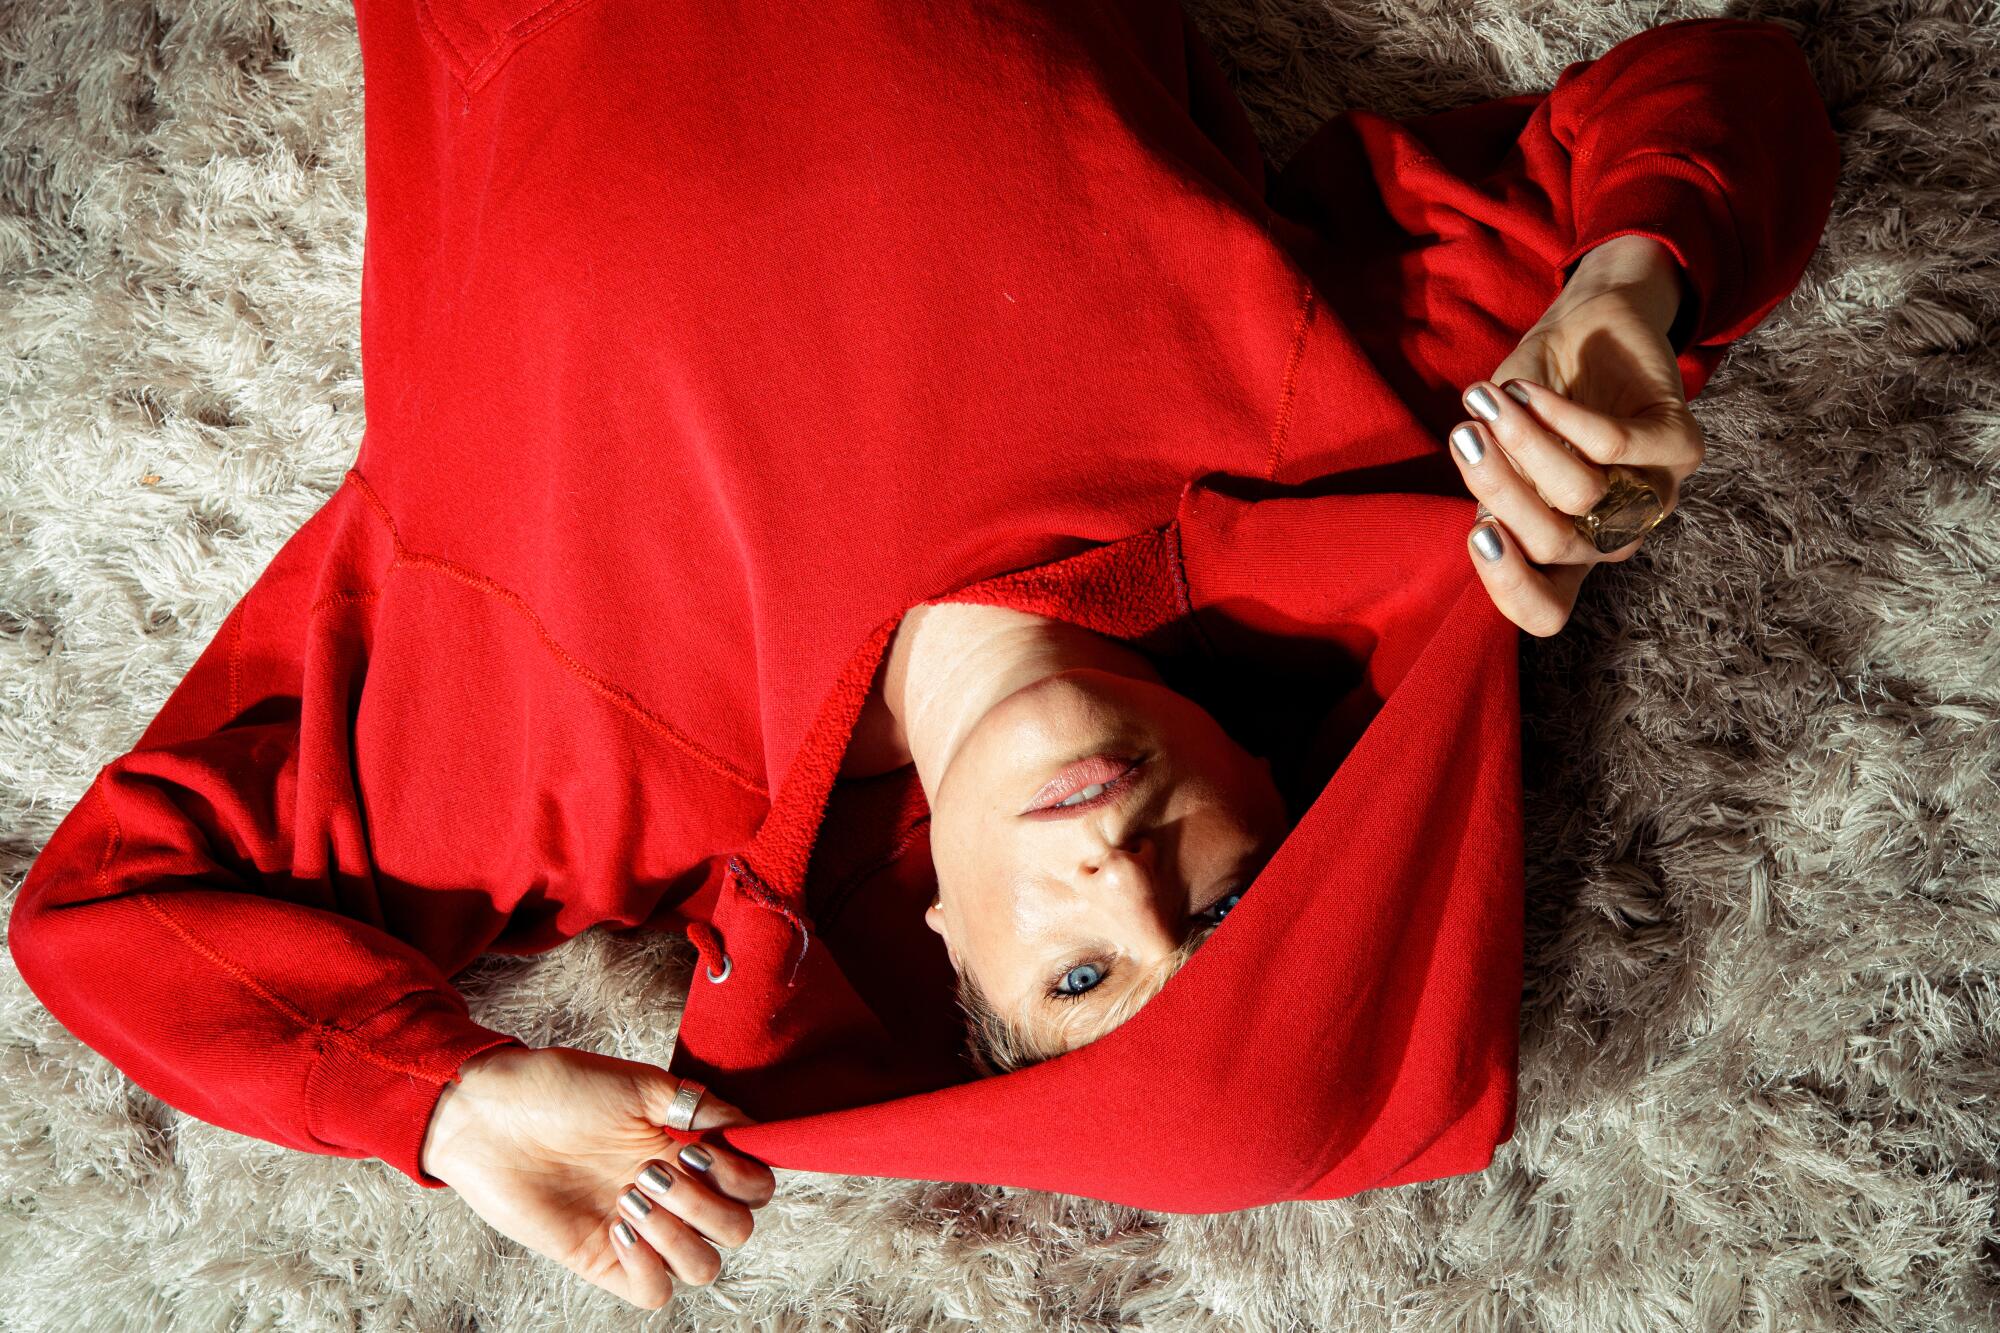 A woman in a red hoodie lying on a shag rug.